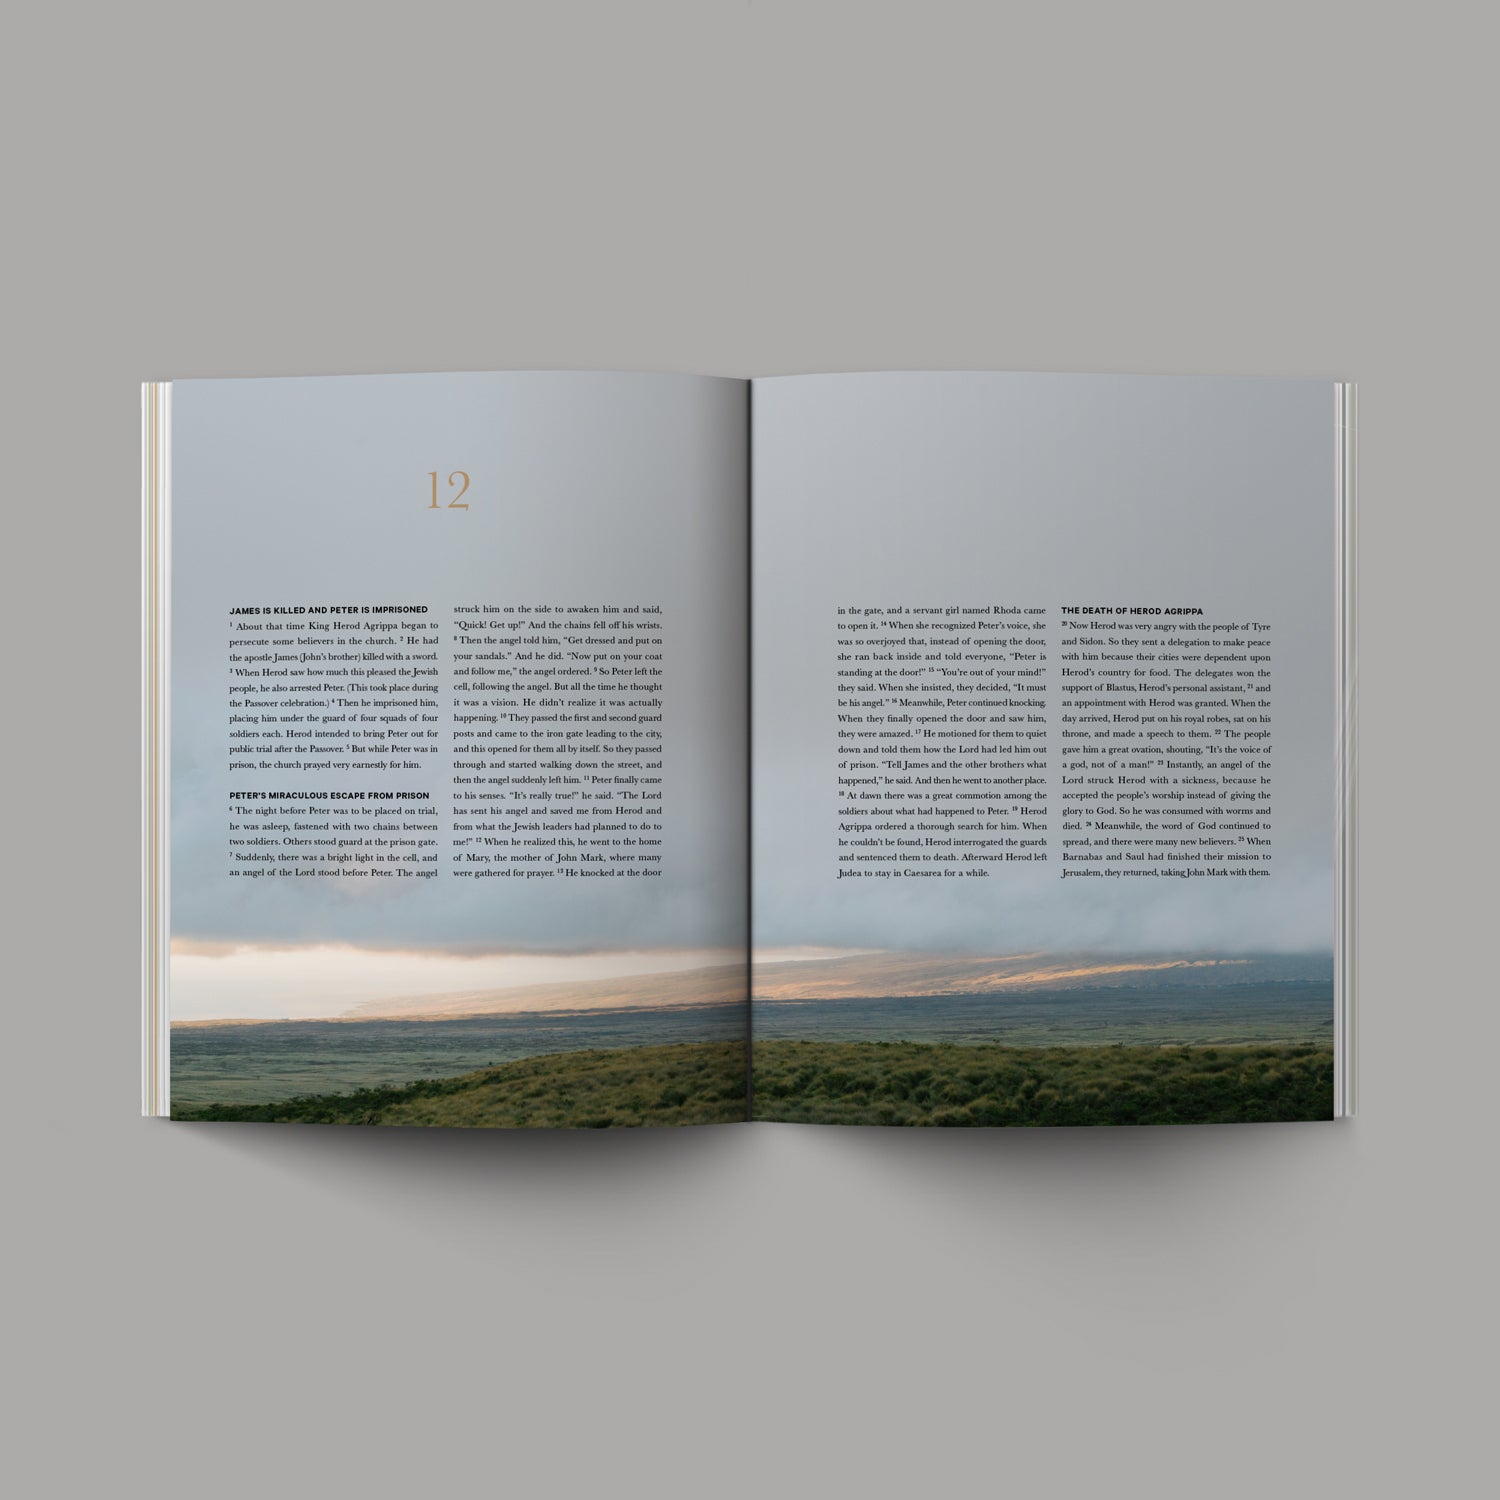 The Book of Acts open, Chapter 12, with image of sunset lanscape